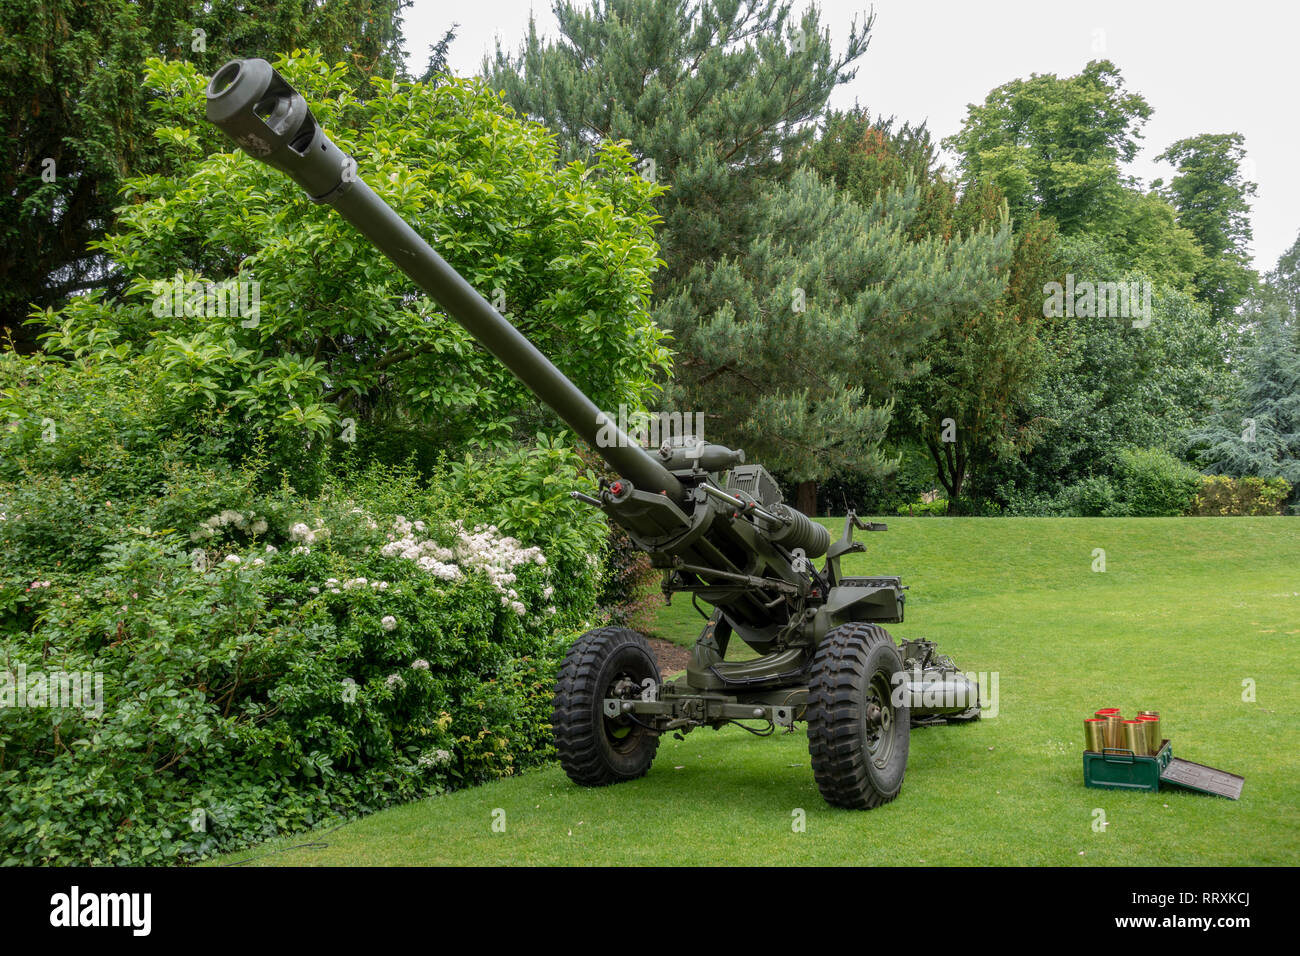 A L118 Light Gun, a 105 mm towed howitzer being used for the Royal Salute in June 2018, Museum Gardens, City of York, UK. Stock Photo